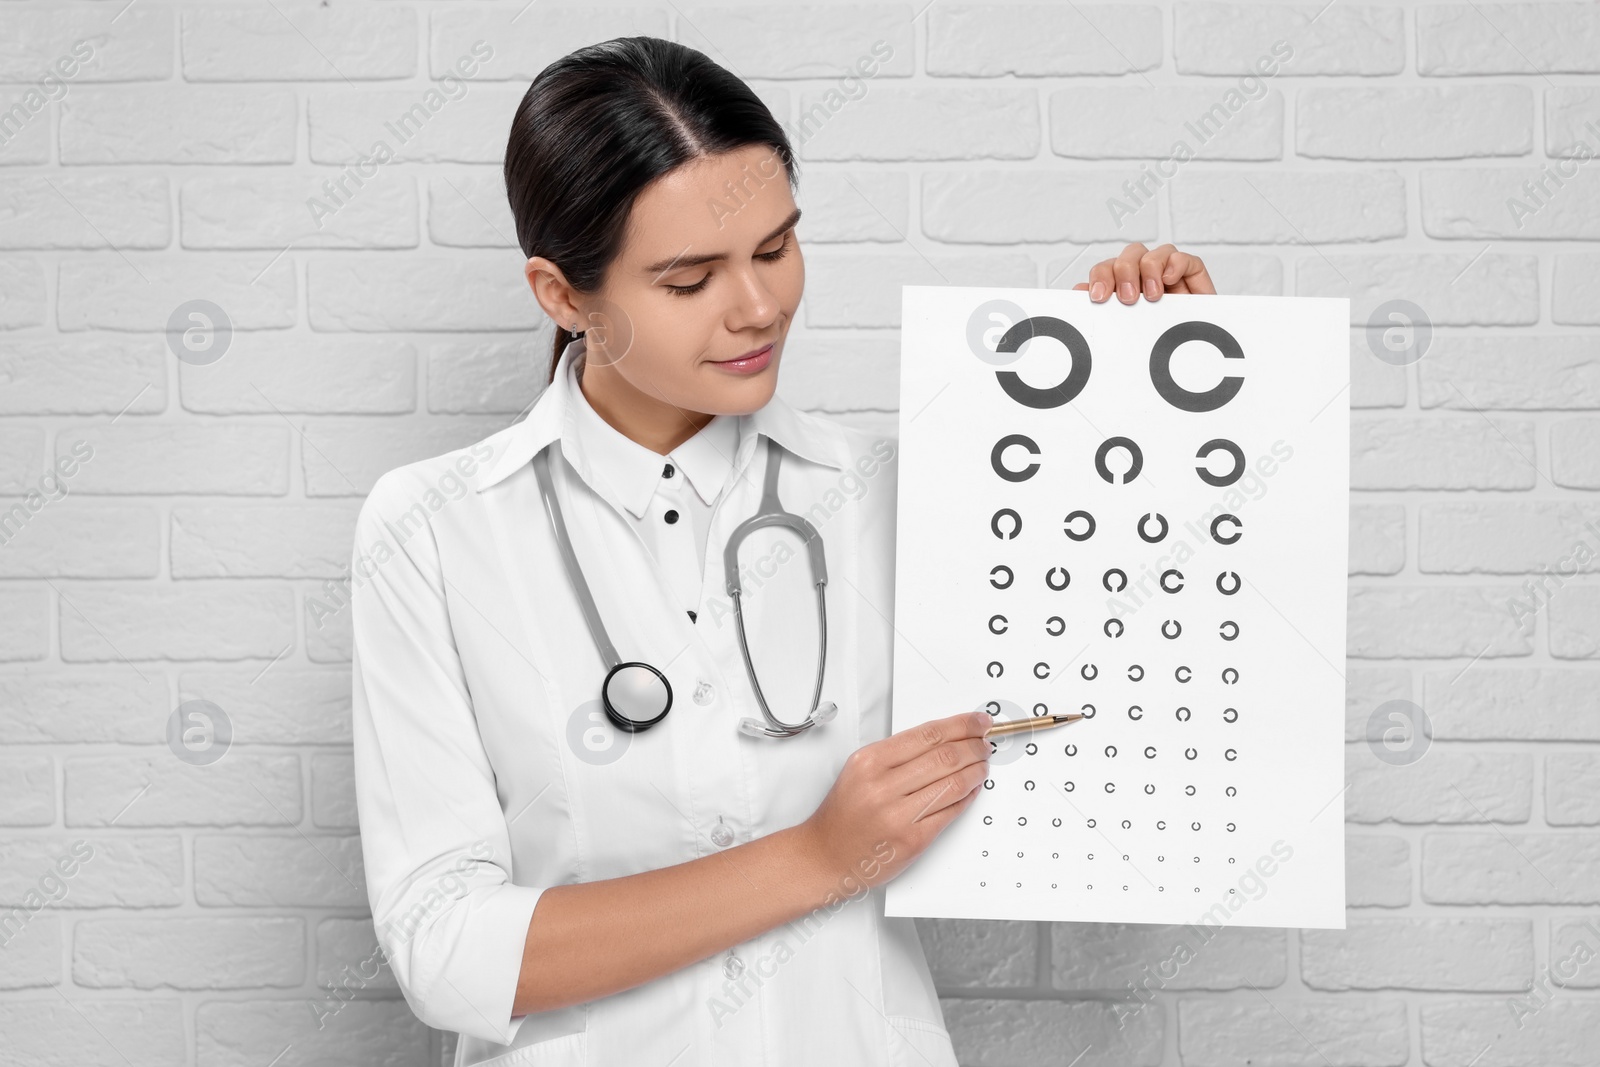 Photo of Ophthalmologist pointing at vision test chart near white brick wall